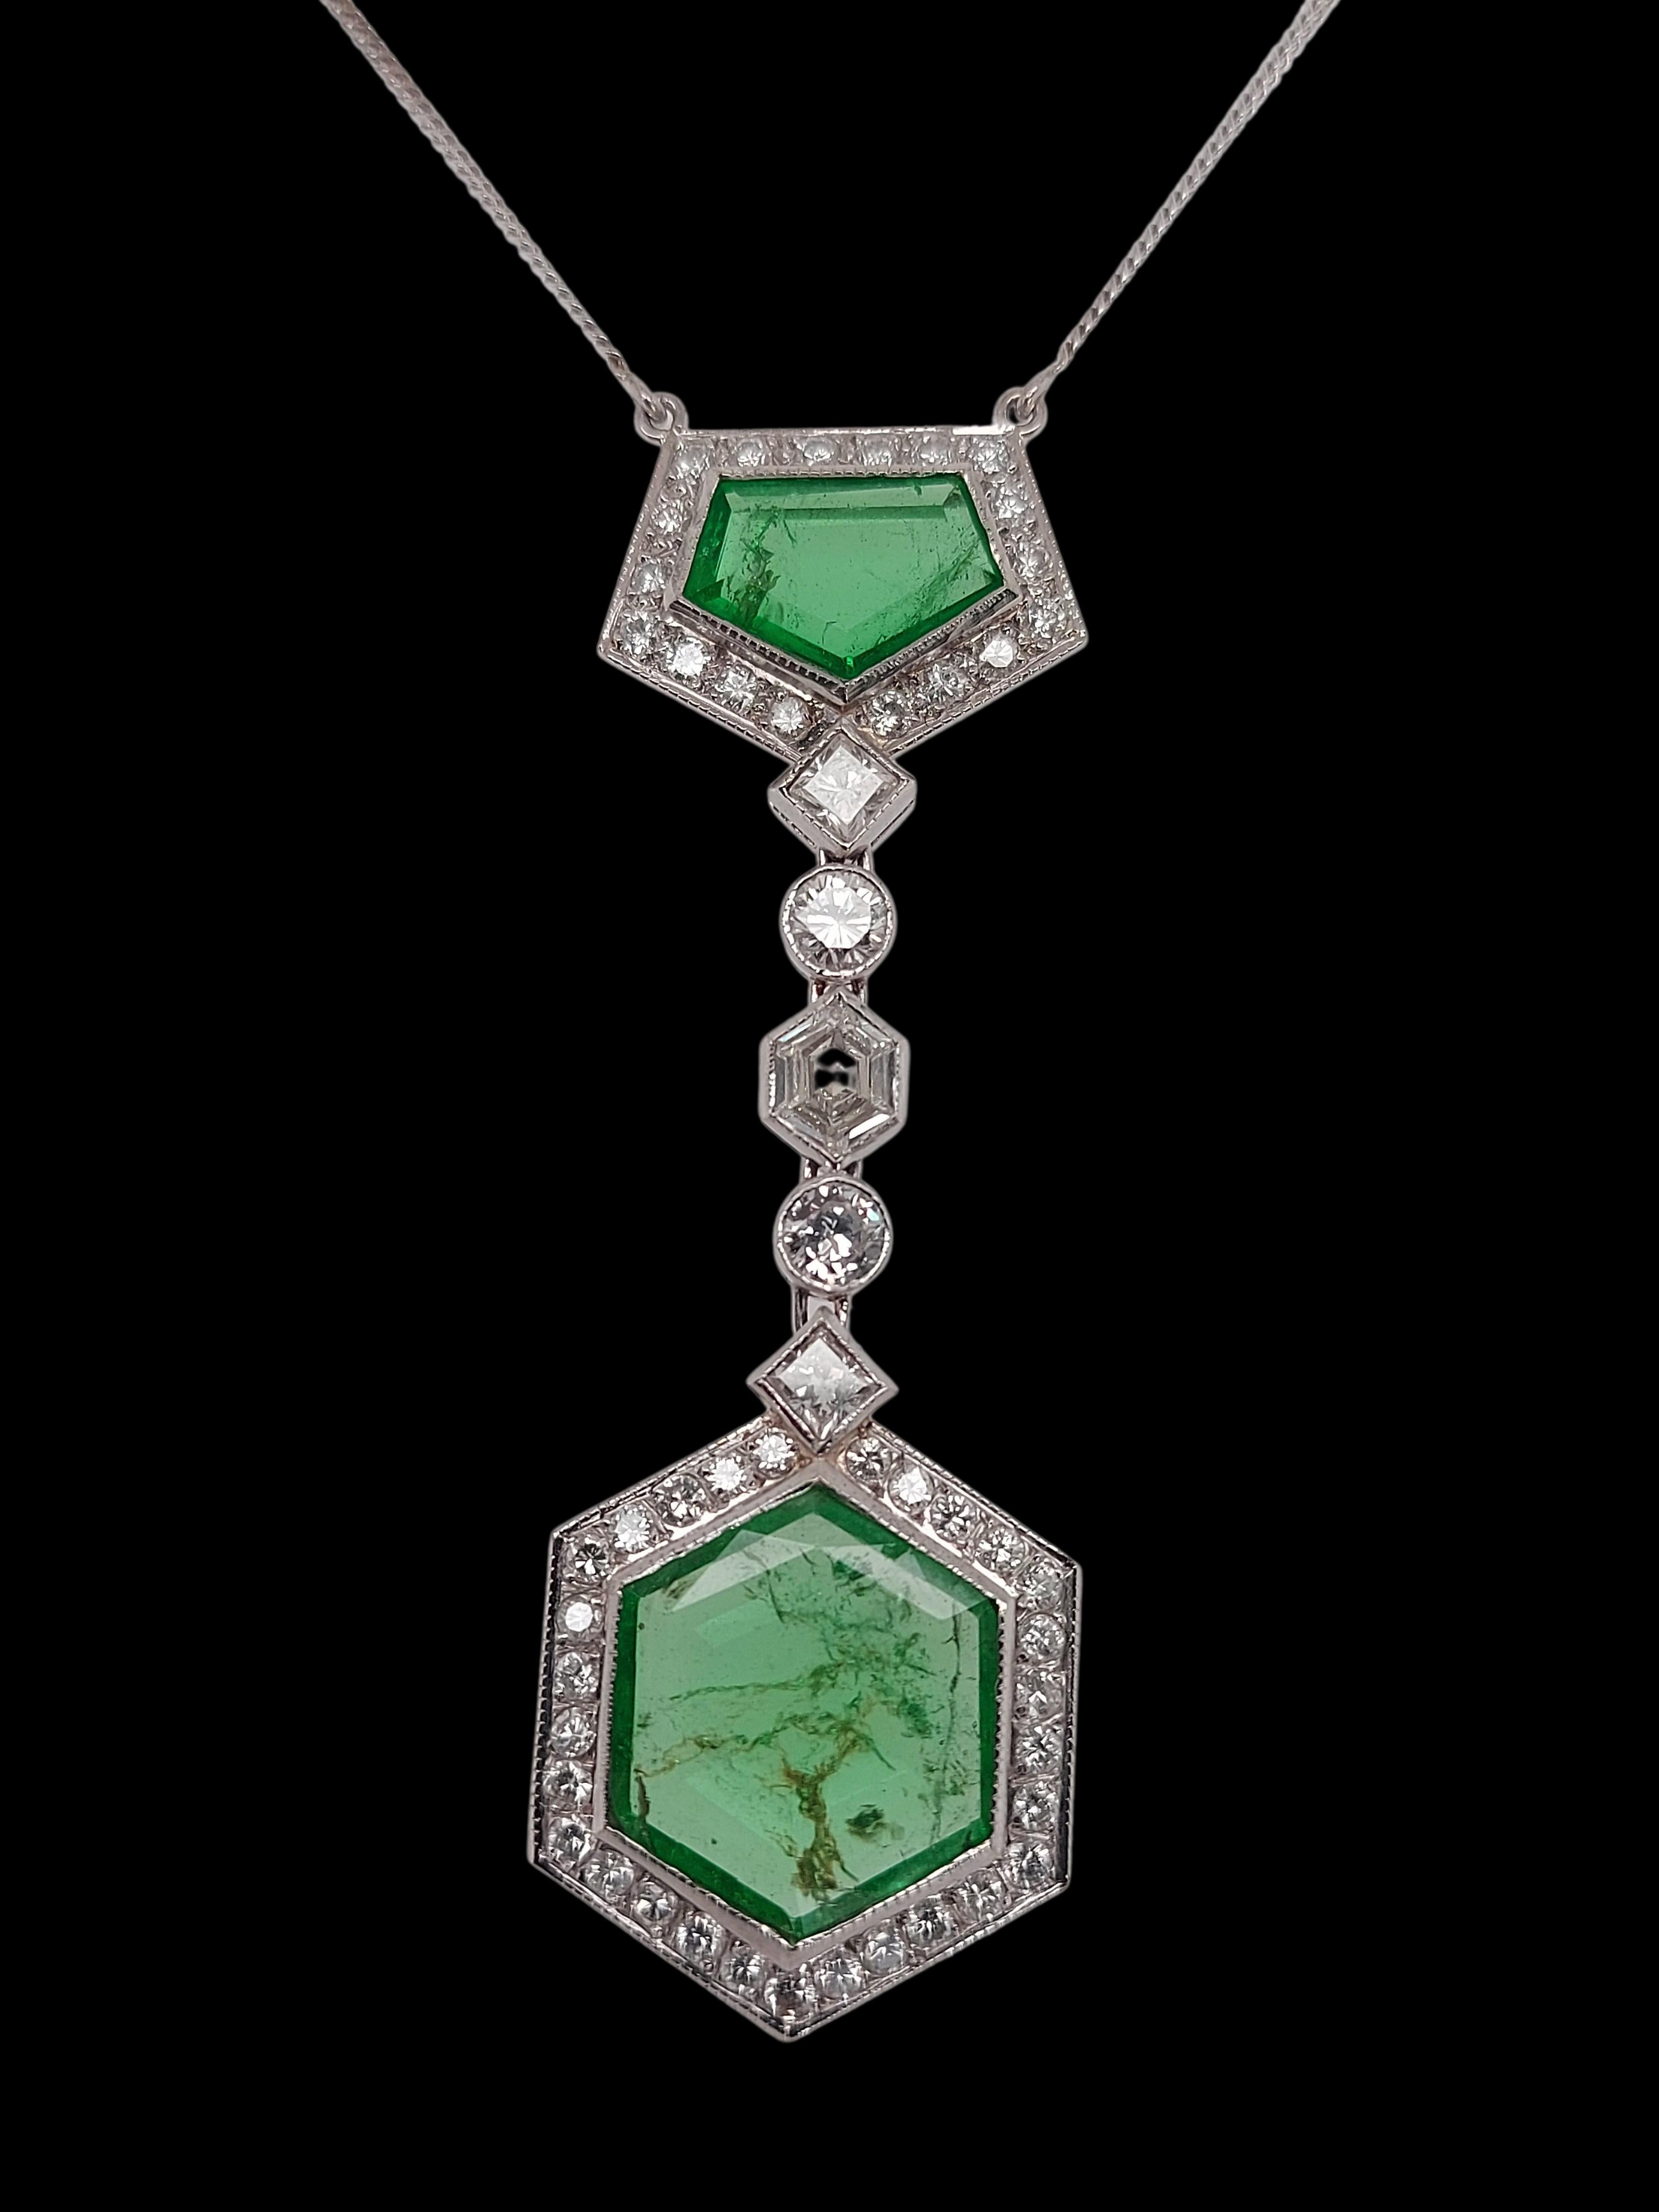 Necklace with 5.5 Carat Colombia Minor Emerald and Diamonds, CGL Certificate For Sale 1